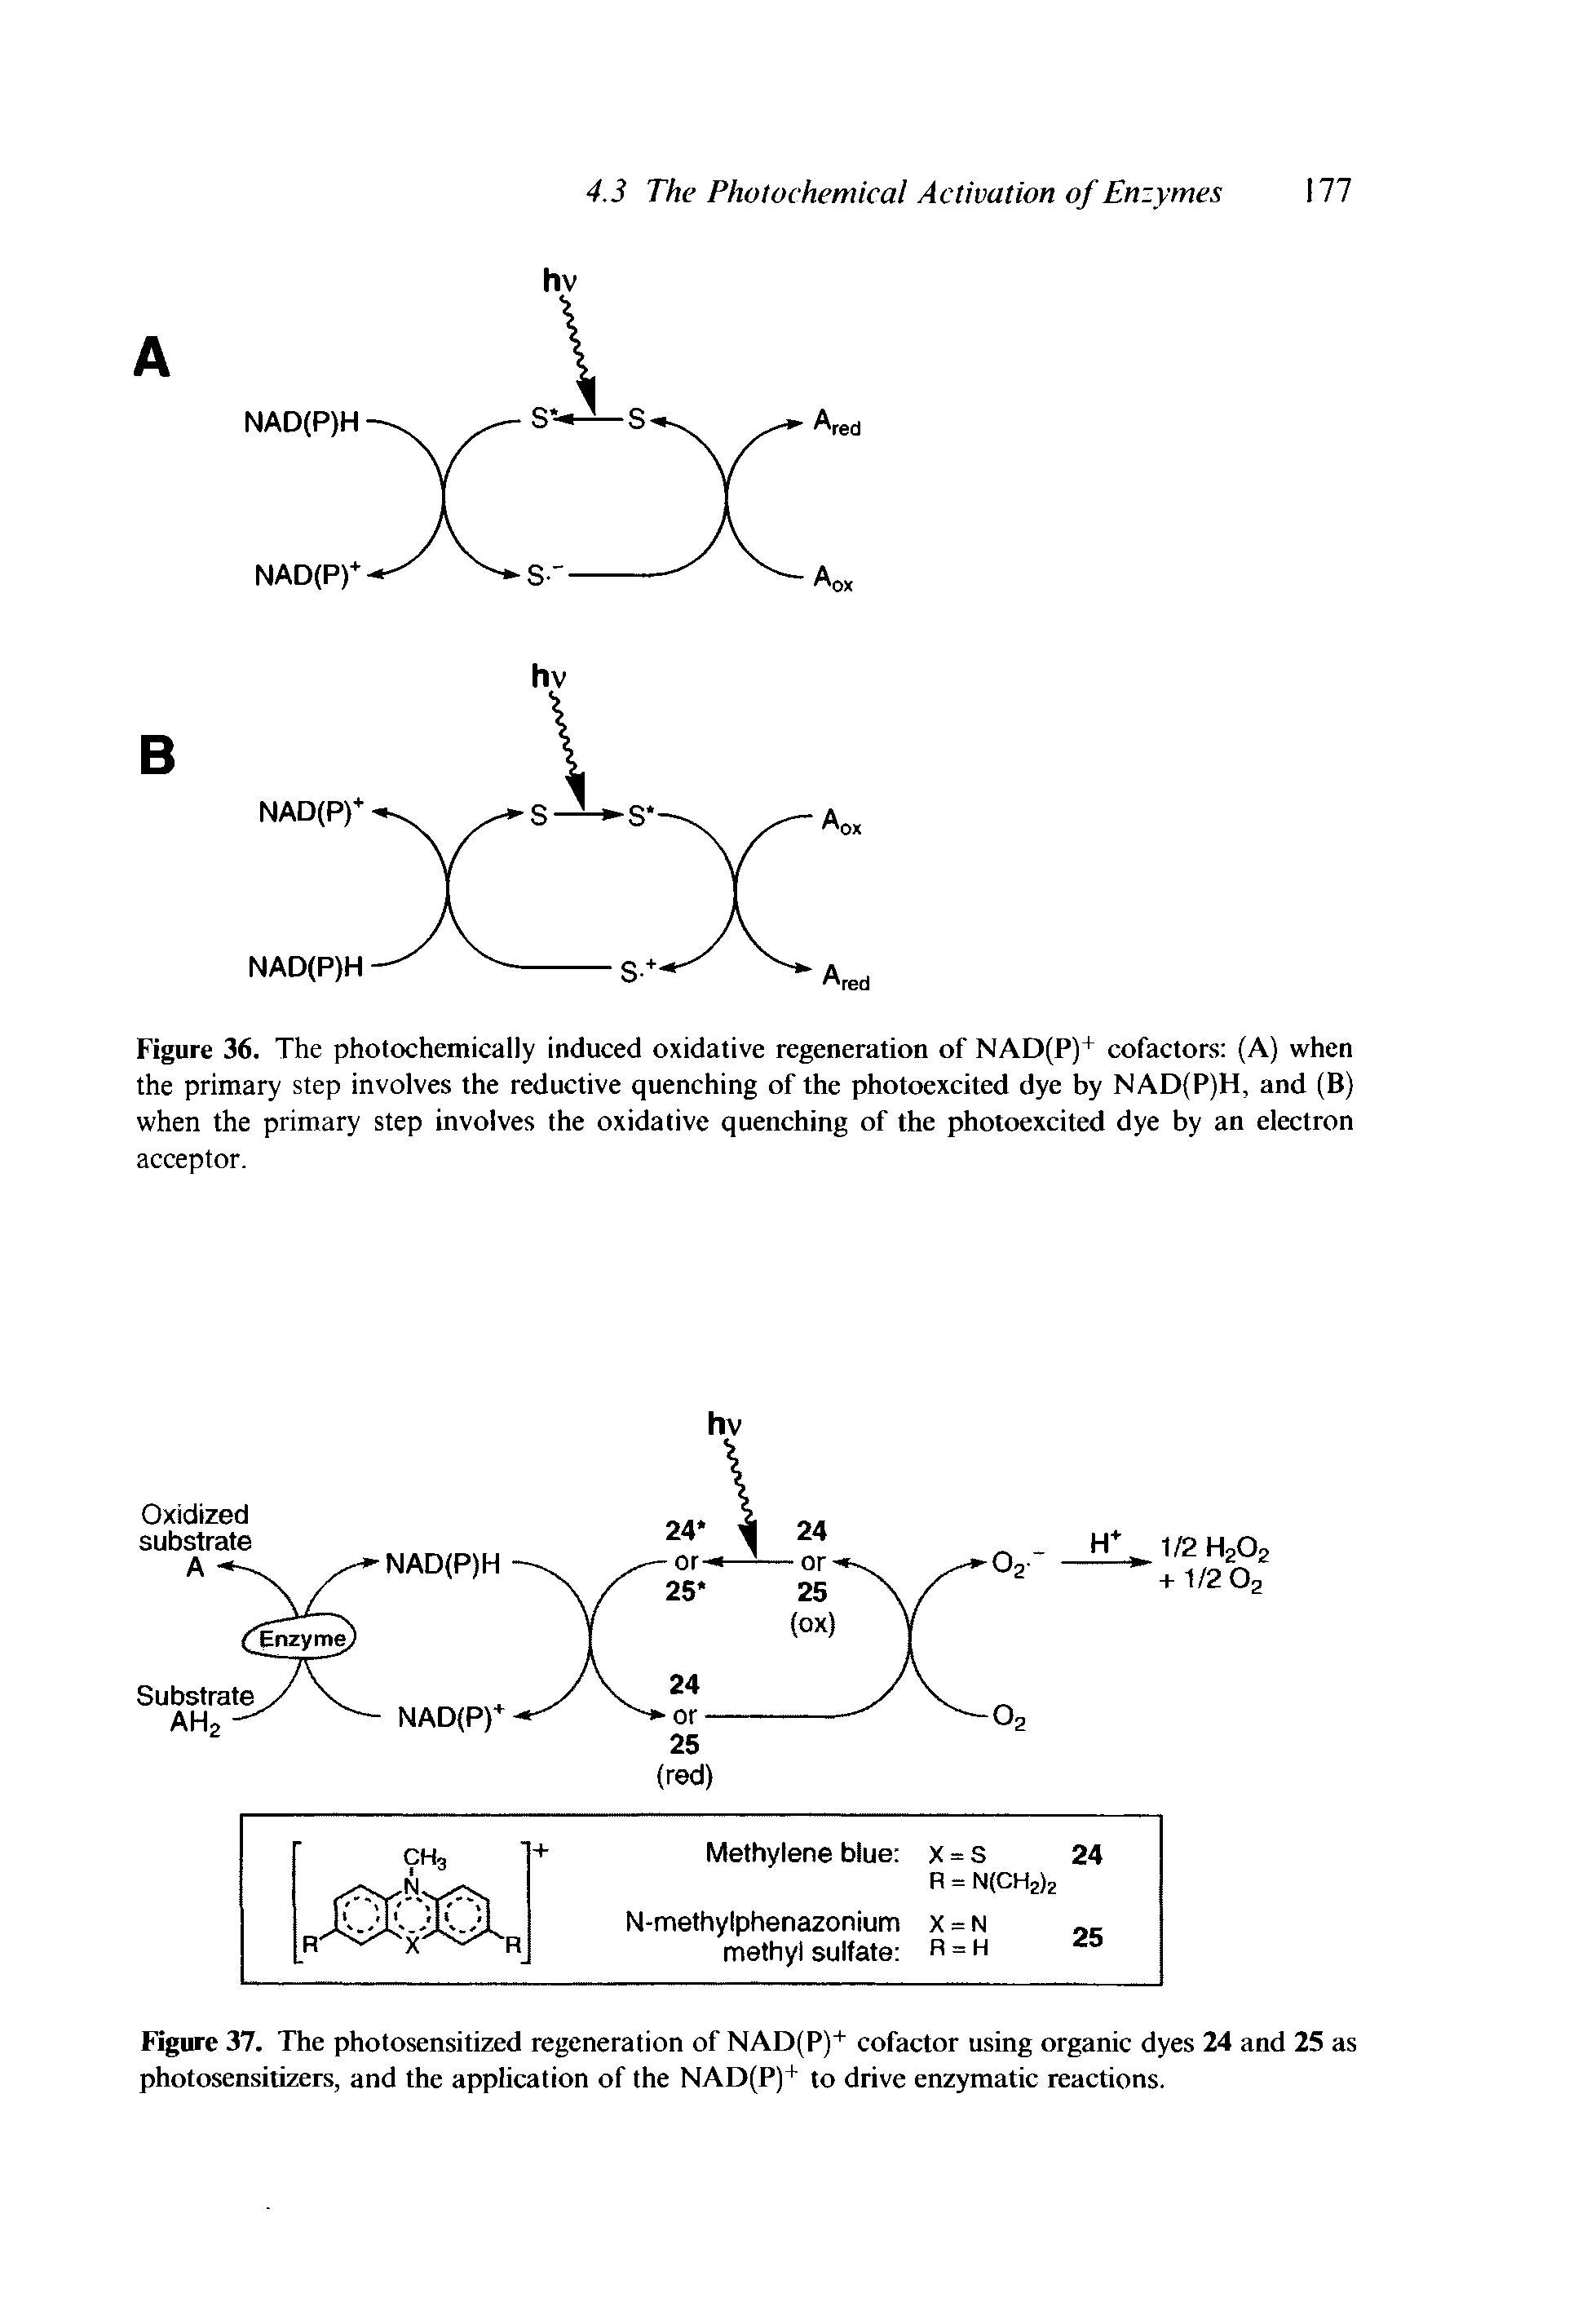 Figure 36. The photochemically induced oxidative regeneration of NAD(P)+ cofactors (A) when the primary step involves the reductive quenching of the photoexcited dye by NAD(P)H, and (B) when the primary step involves the oxidative quenching of the photoexcited dye by an electron acceptor.